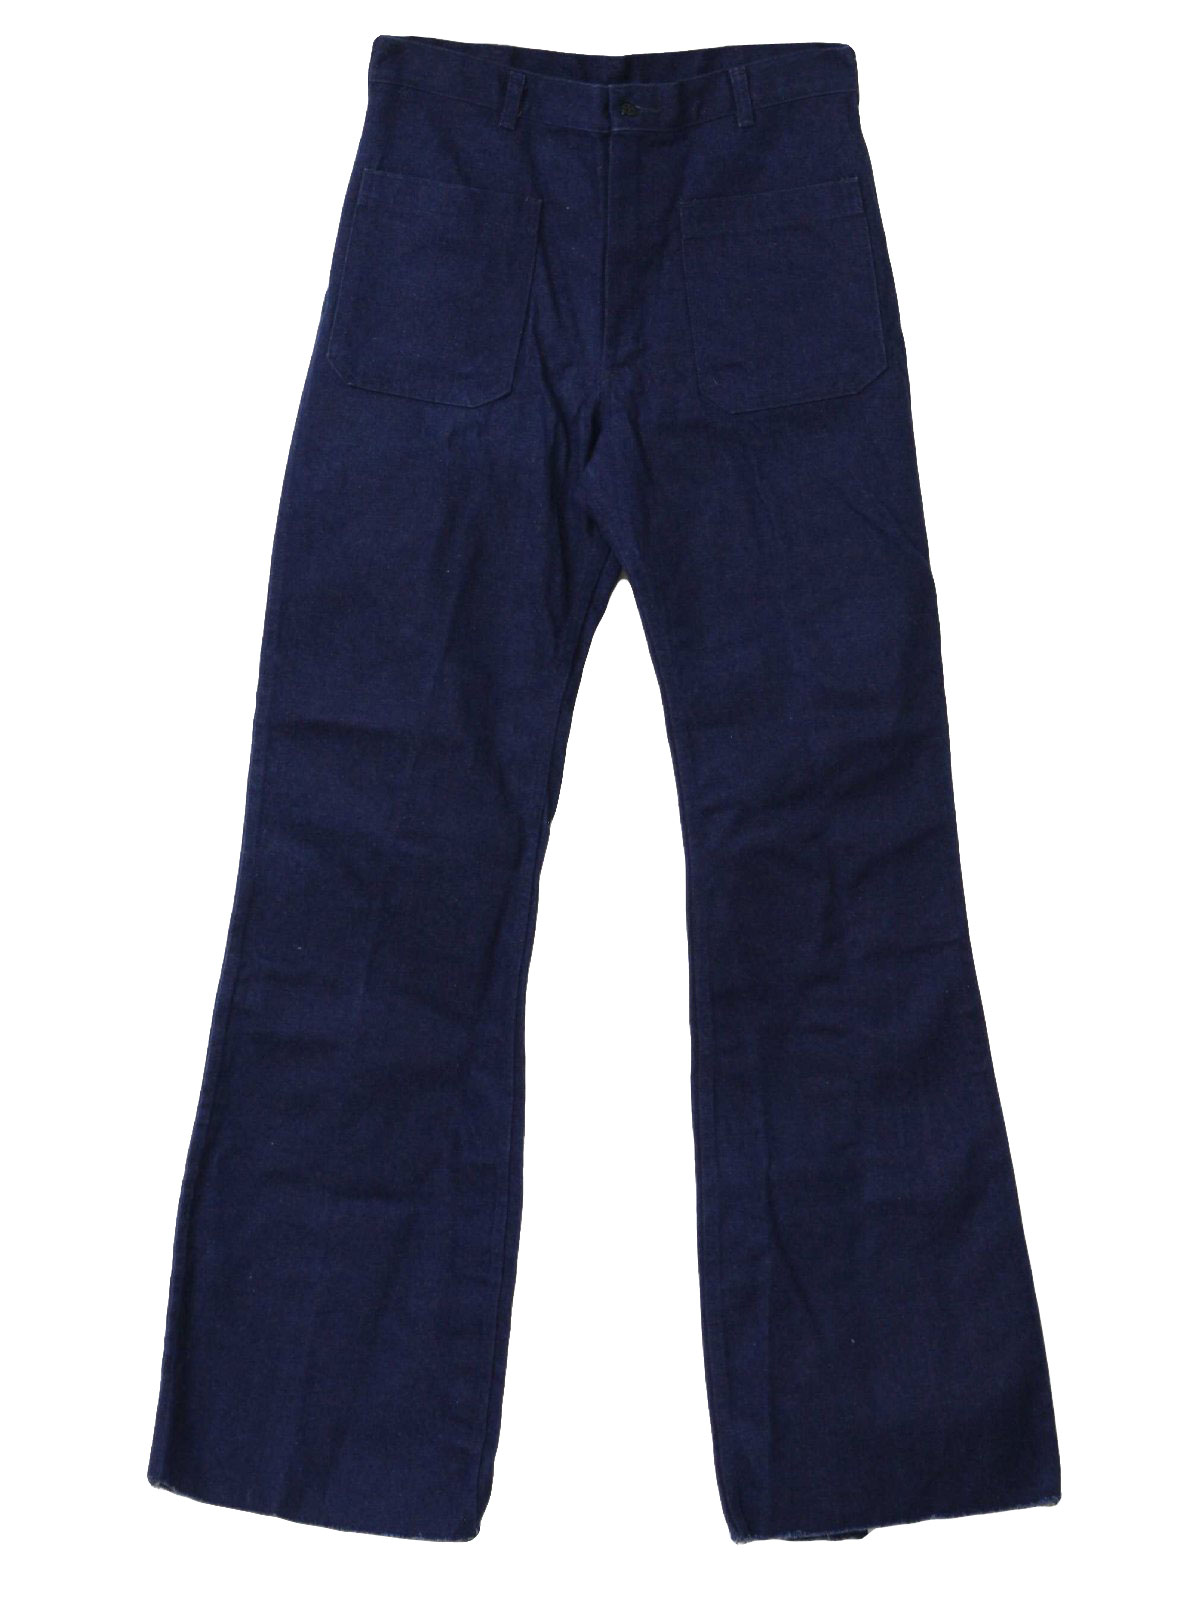 Retro 1970's Bellbottom Pants (Utility Trousers) : 70s -Utility ...